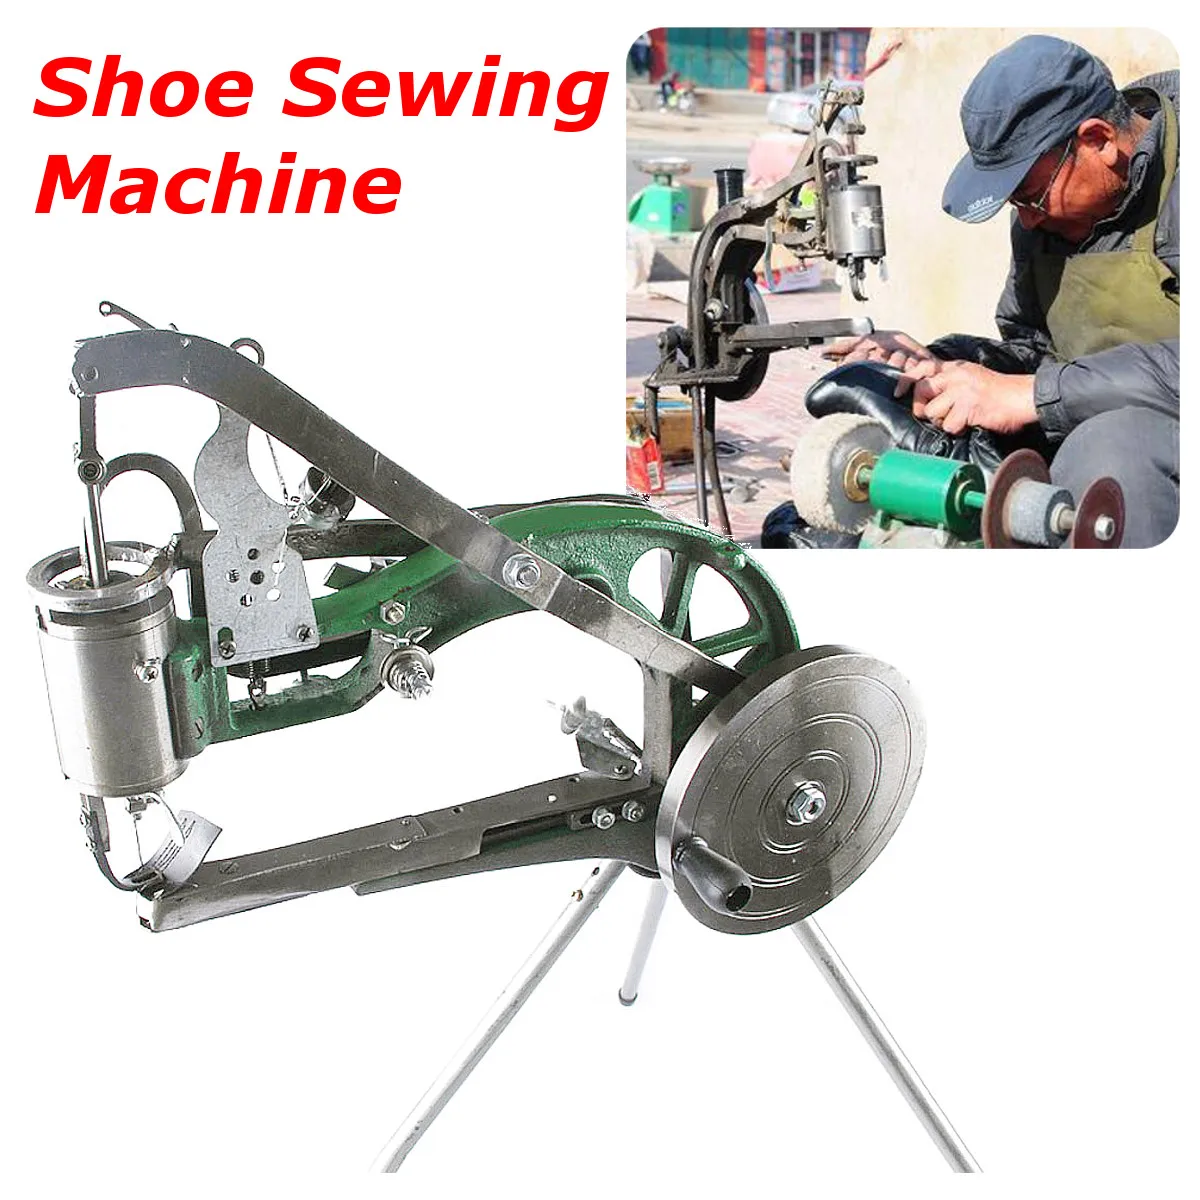 

NEW Manual Industrial Shoe Making Sewing Machine Equipment Shoes Repairs Sewing Machine For All Kinds Shoes (60x45cm)